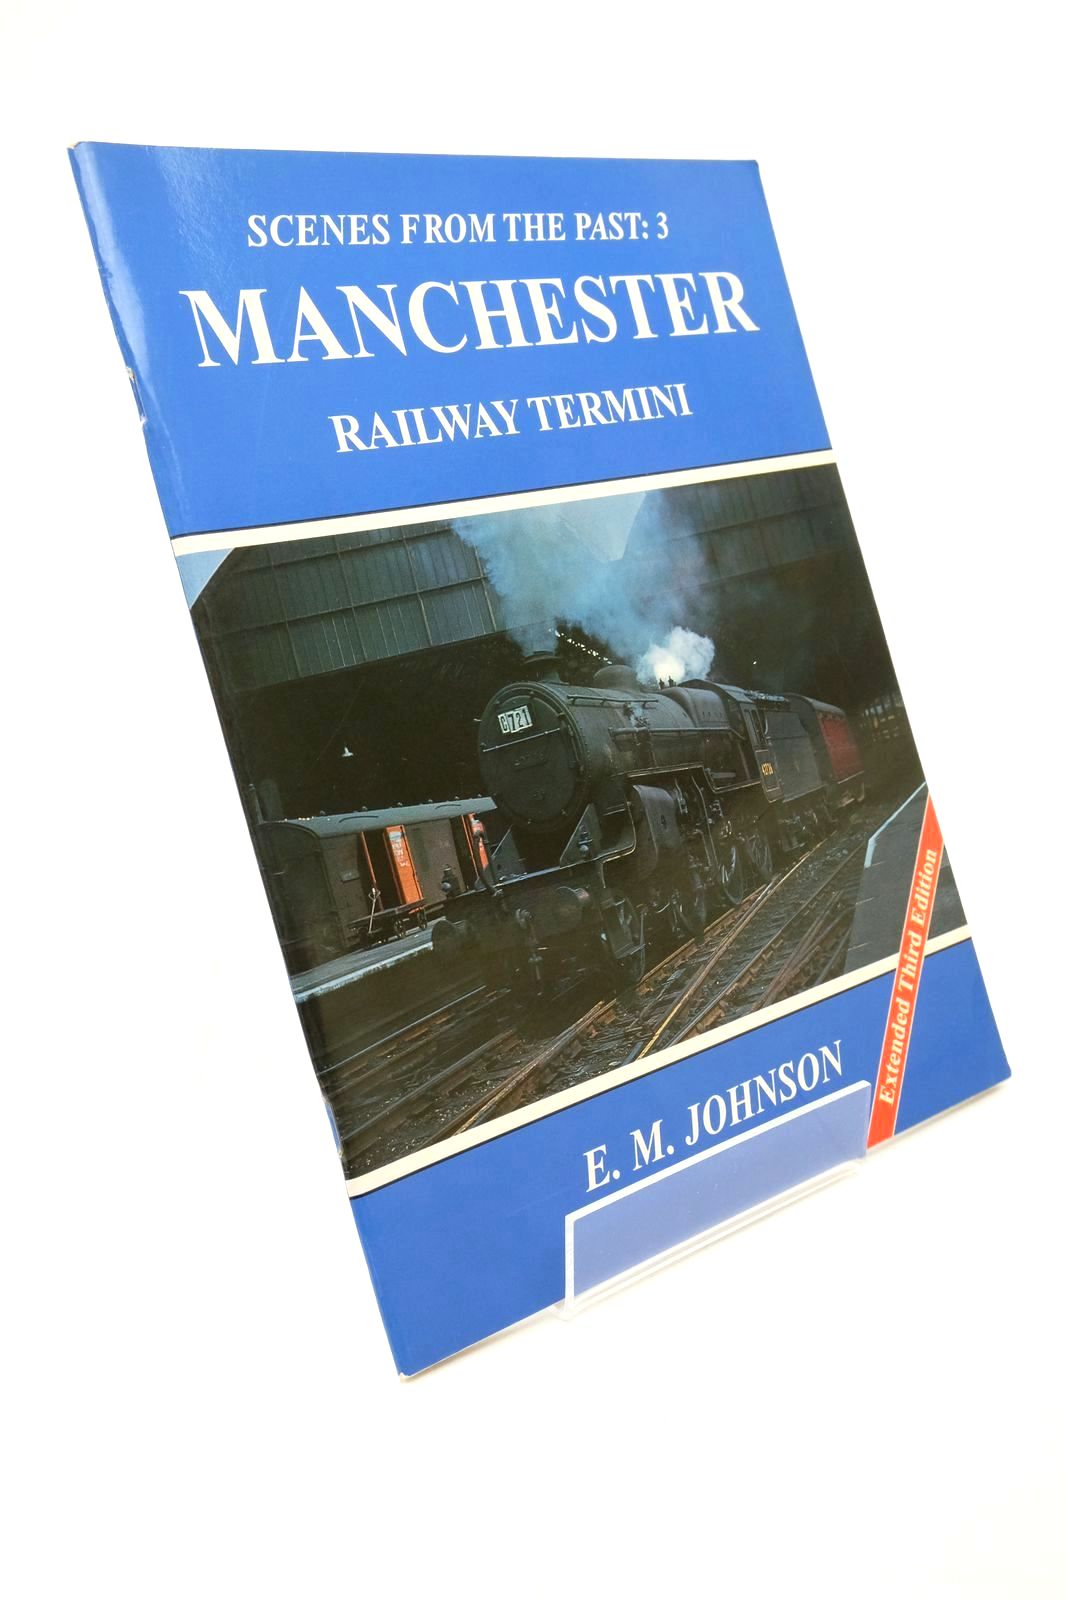 Photo of MANCHESTER RAILWAY TERMINI (SCENES FROM THE PAST: 3) written by Johnson, E.M. published by Foxline (STOCK CODE: 1322474)  for sale by Stella & Rose's Books